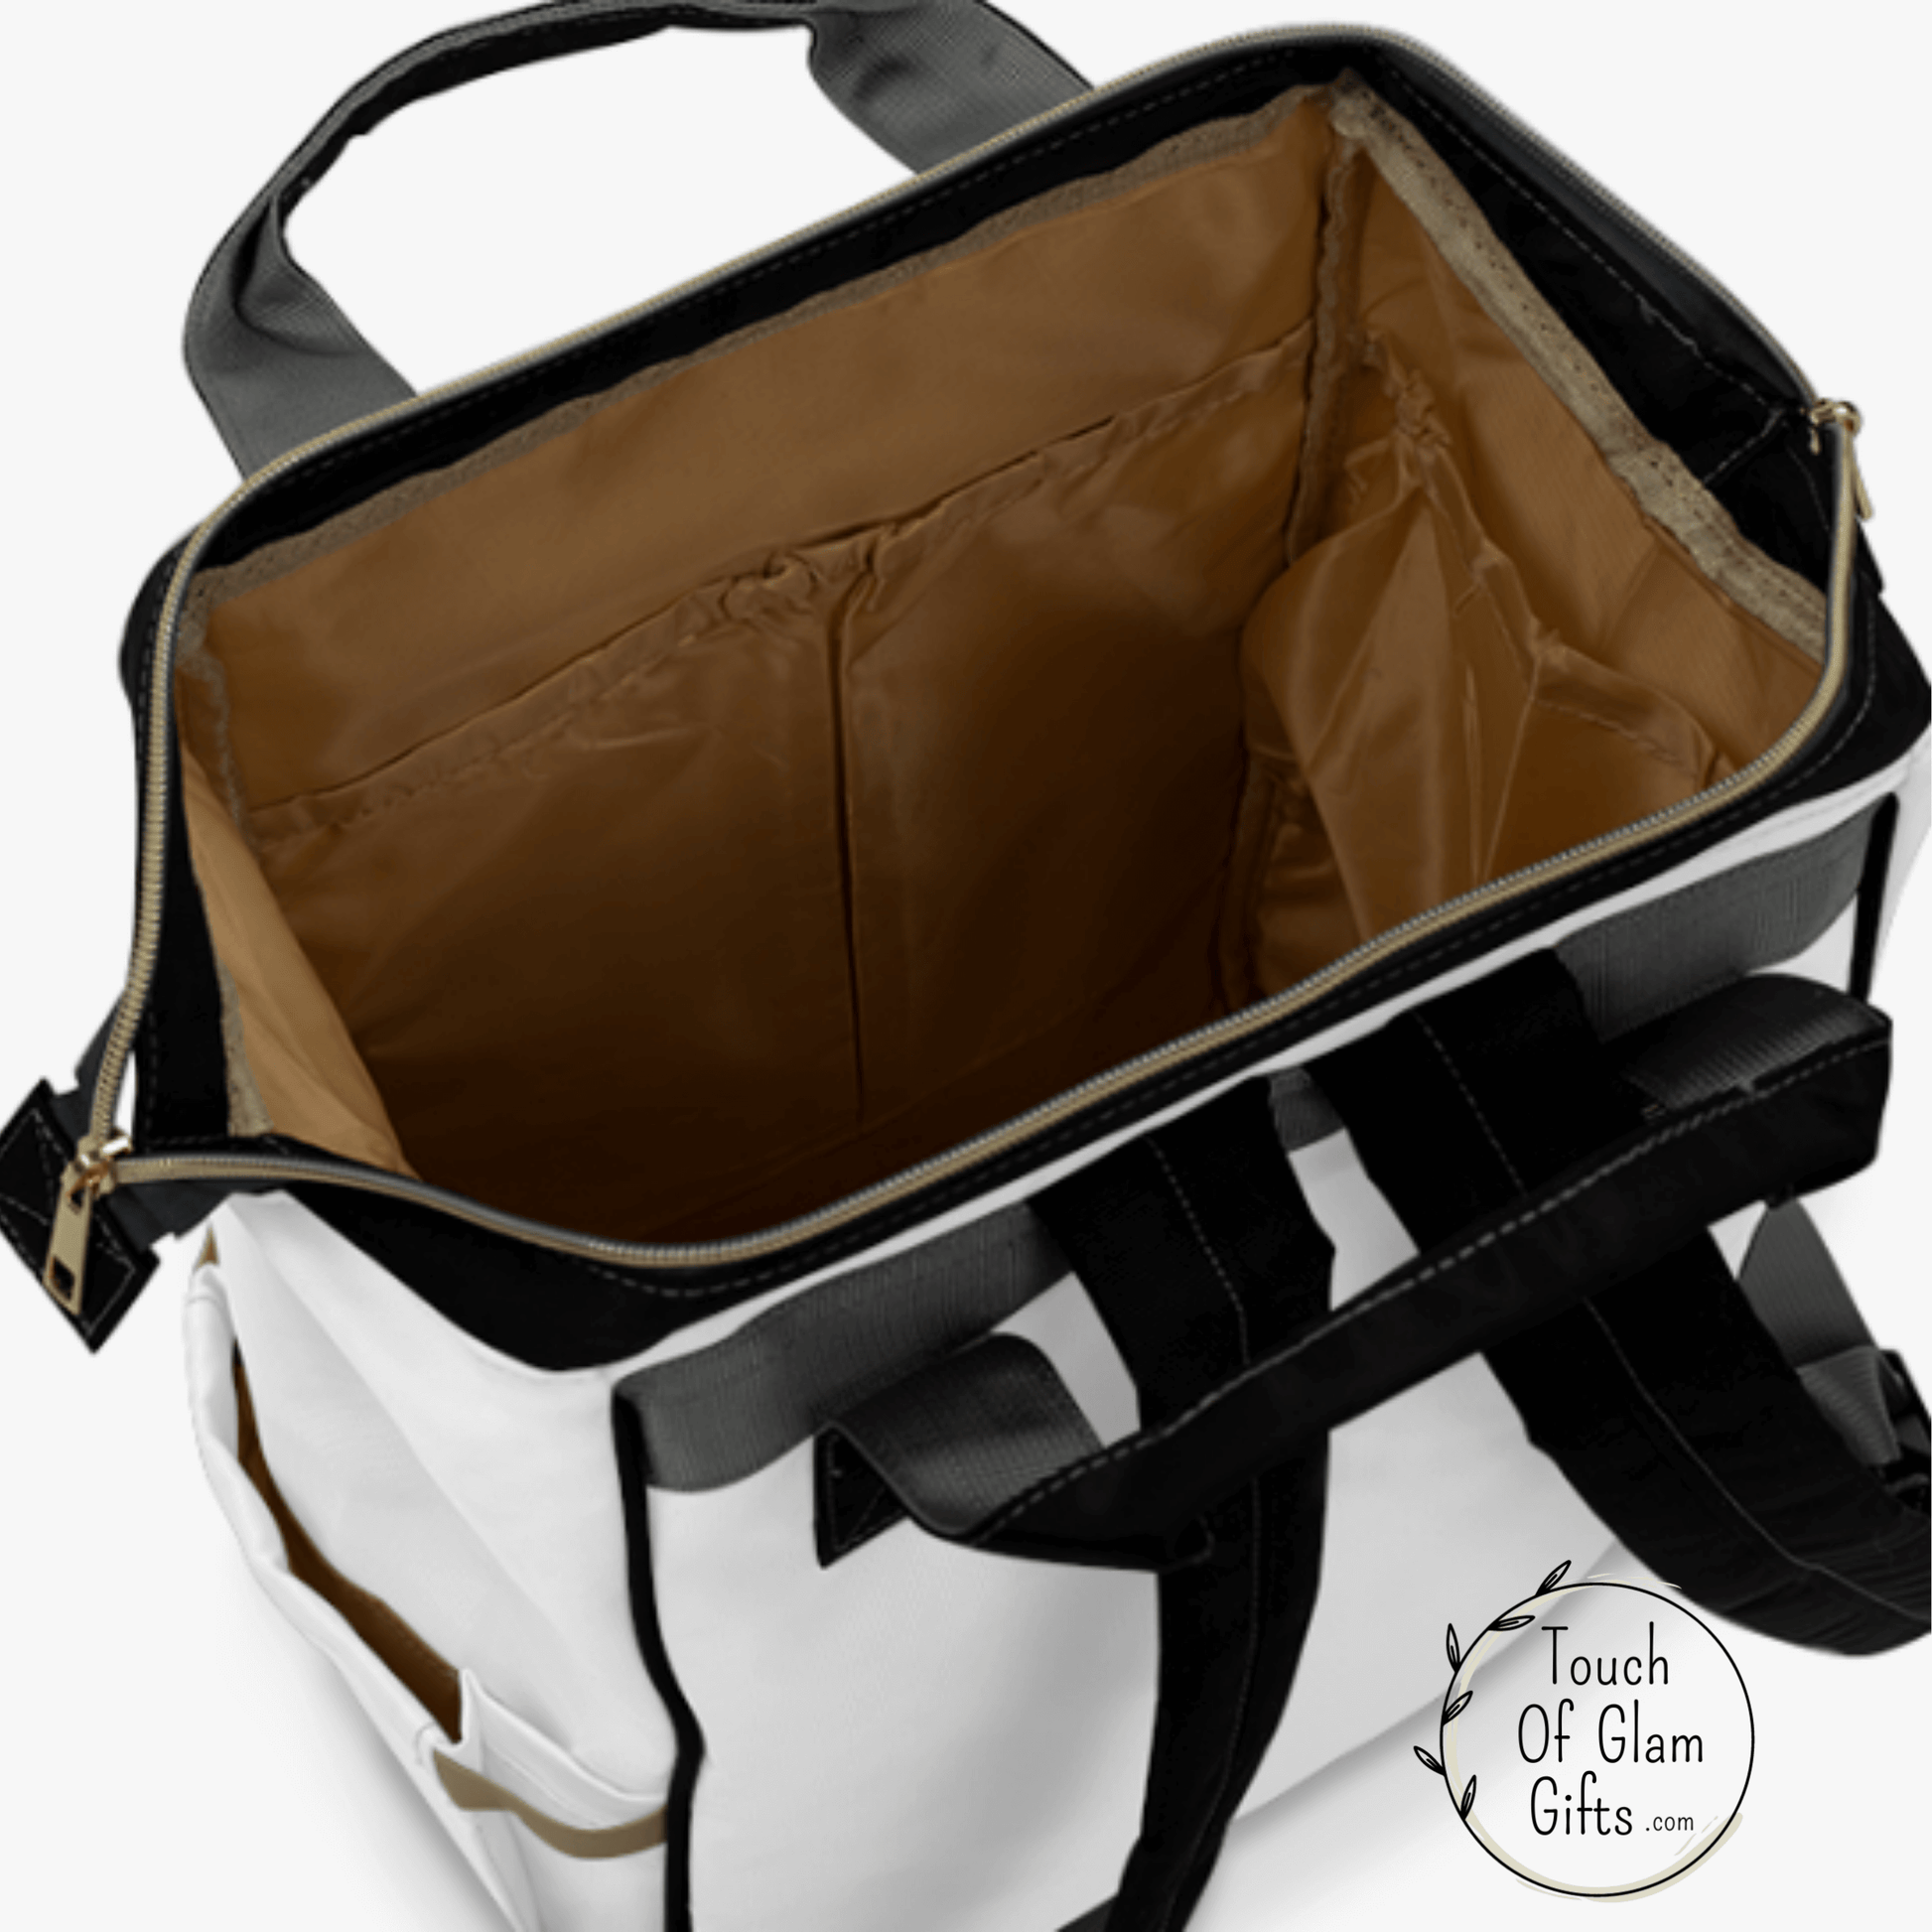 The best part about our diaper backpack is that is stands up on its own when the main zippered compartment is open.